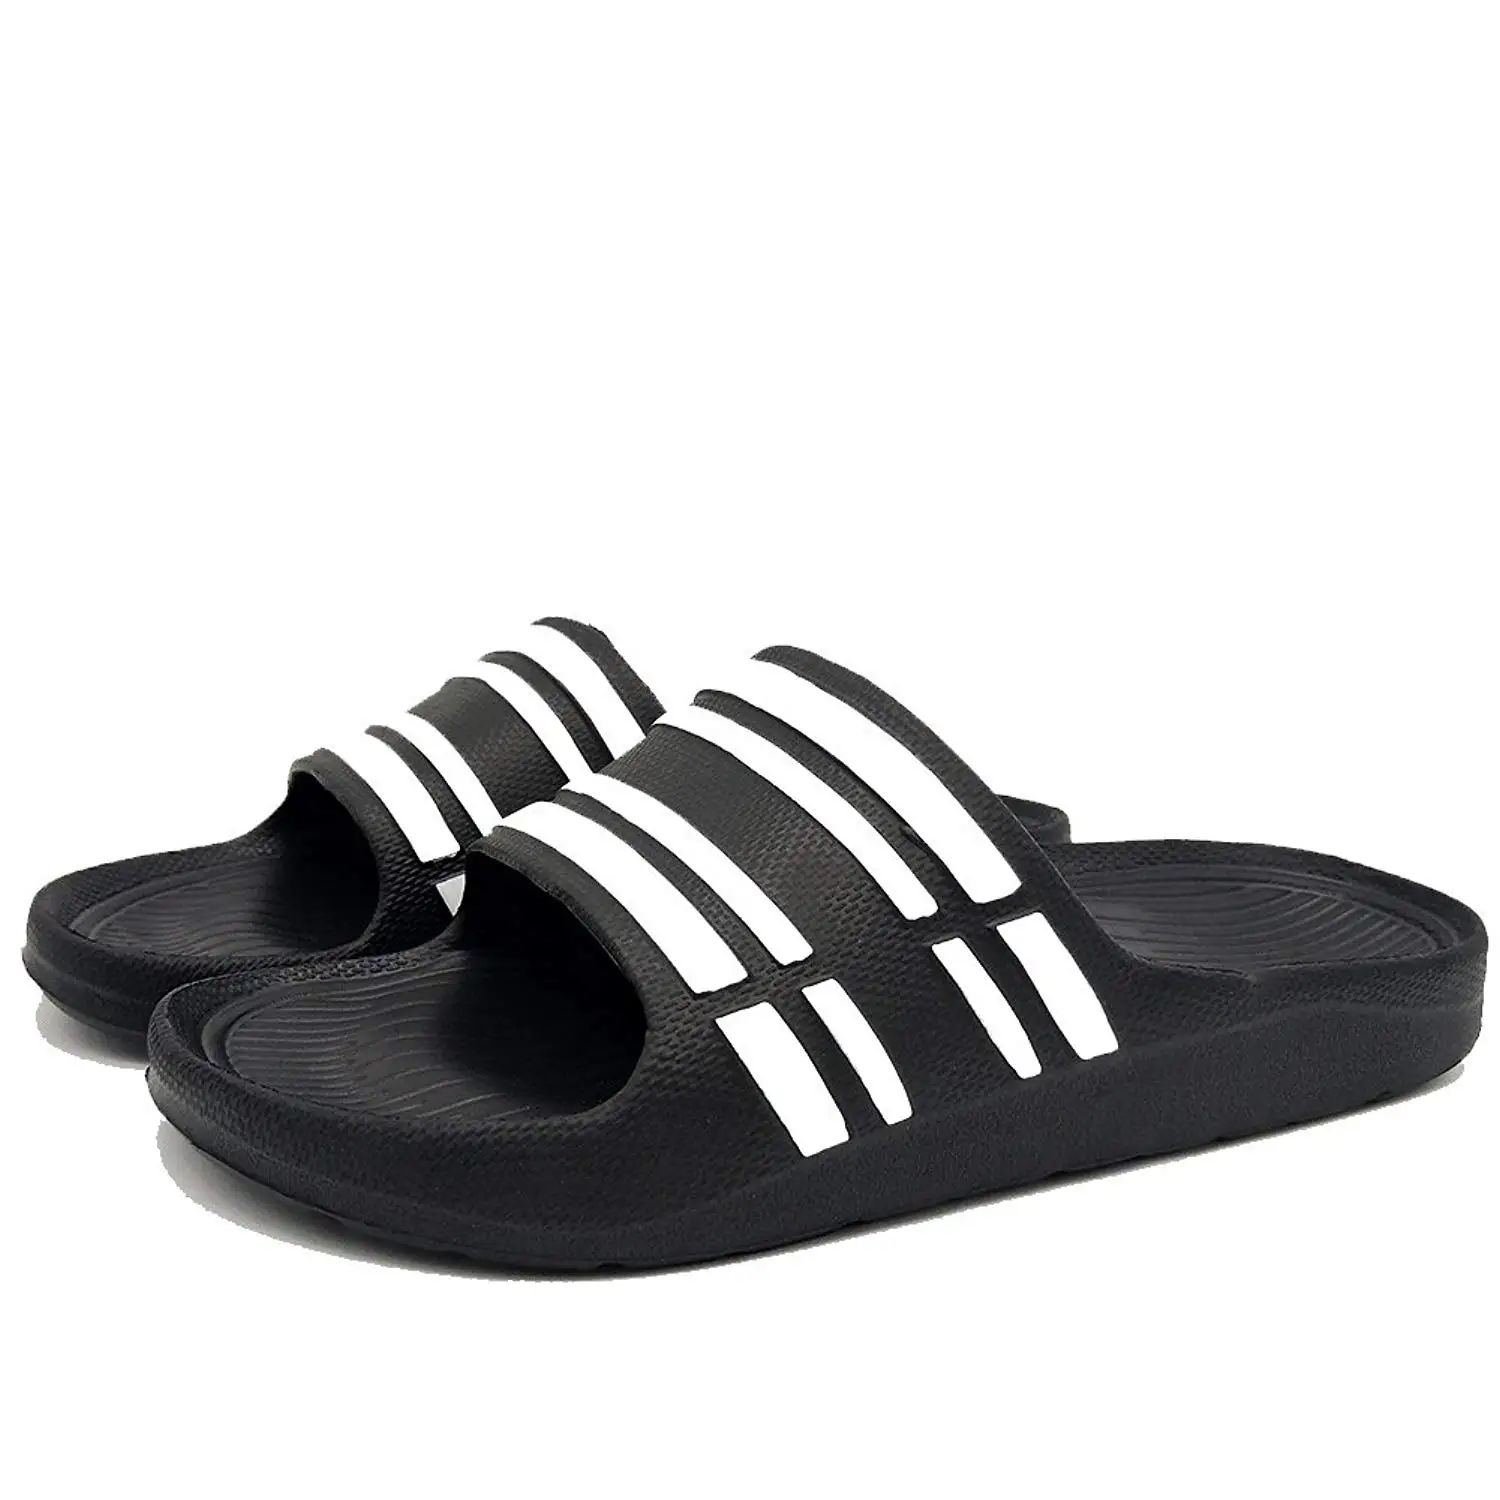 mens slippers arch support